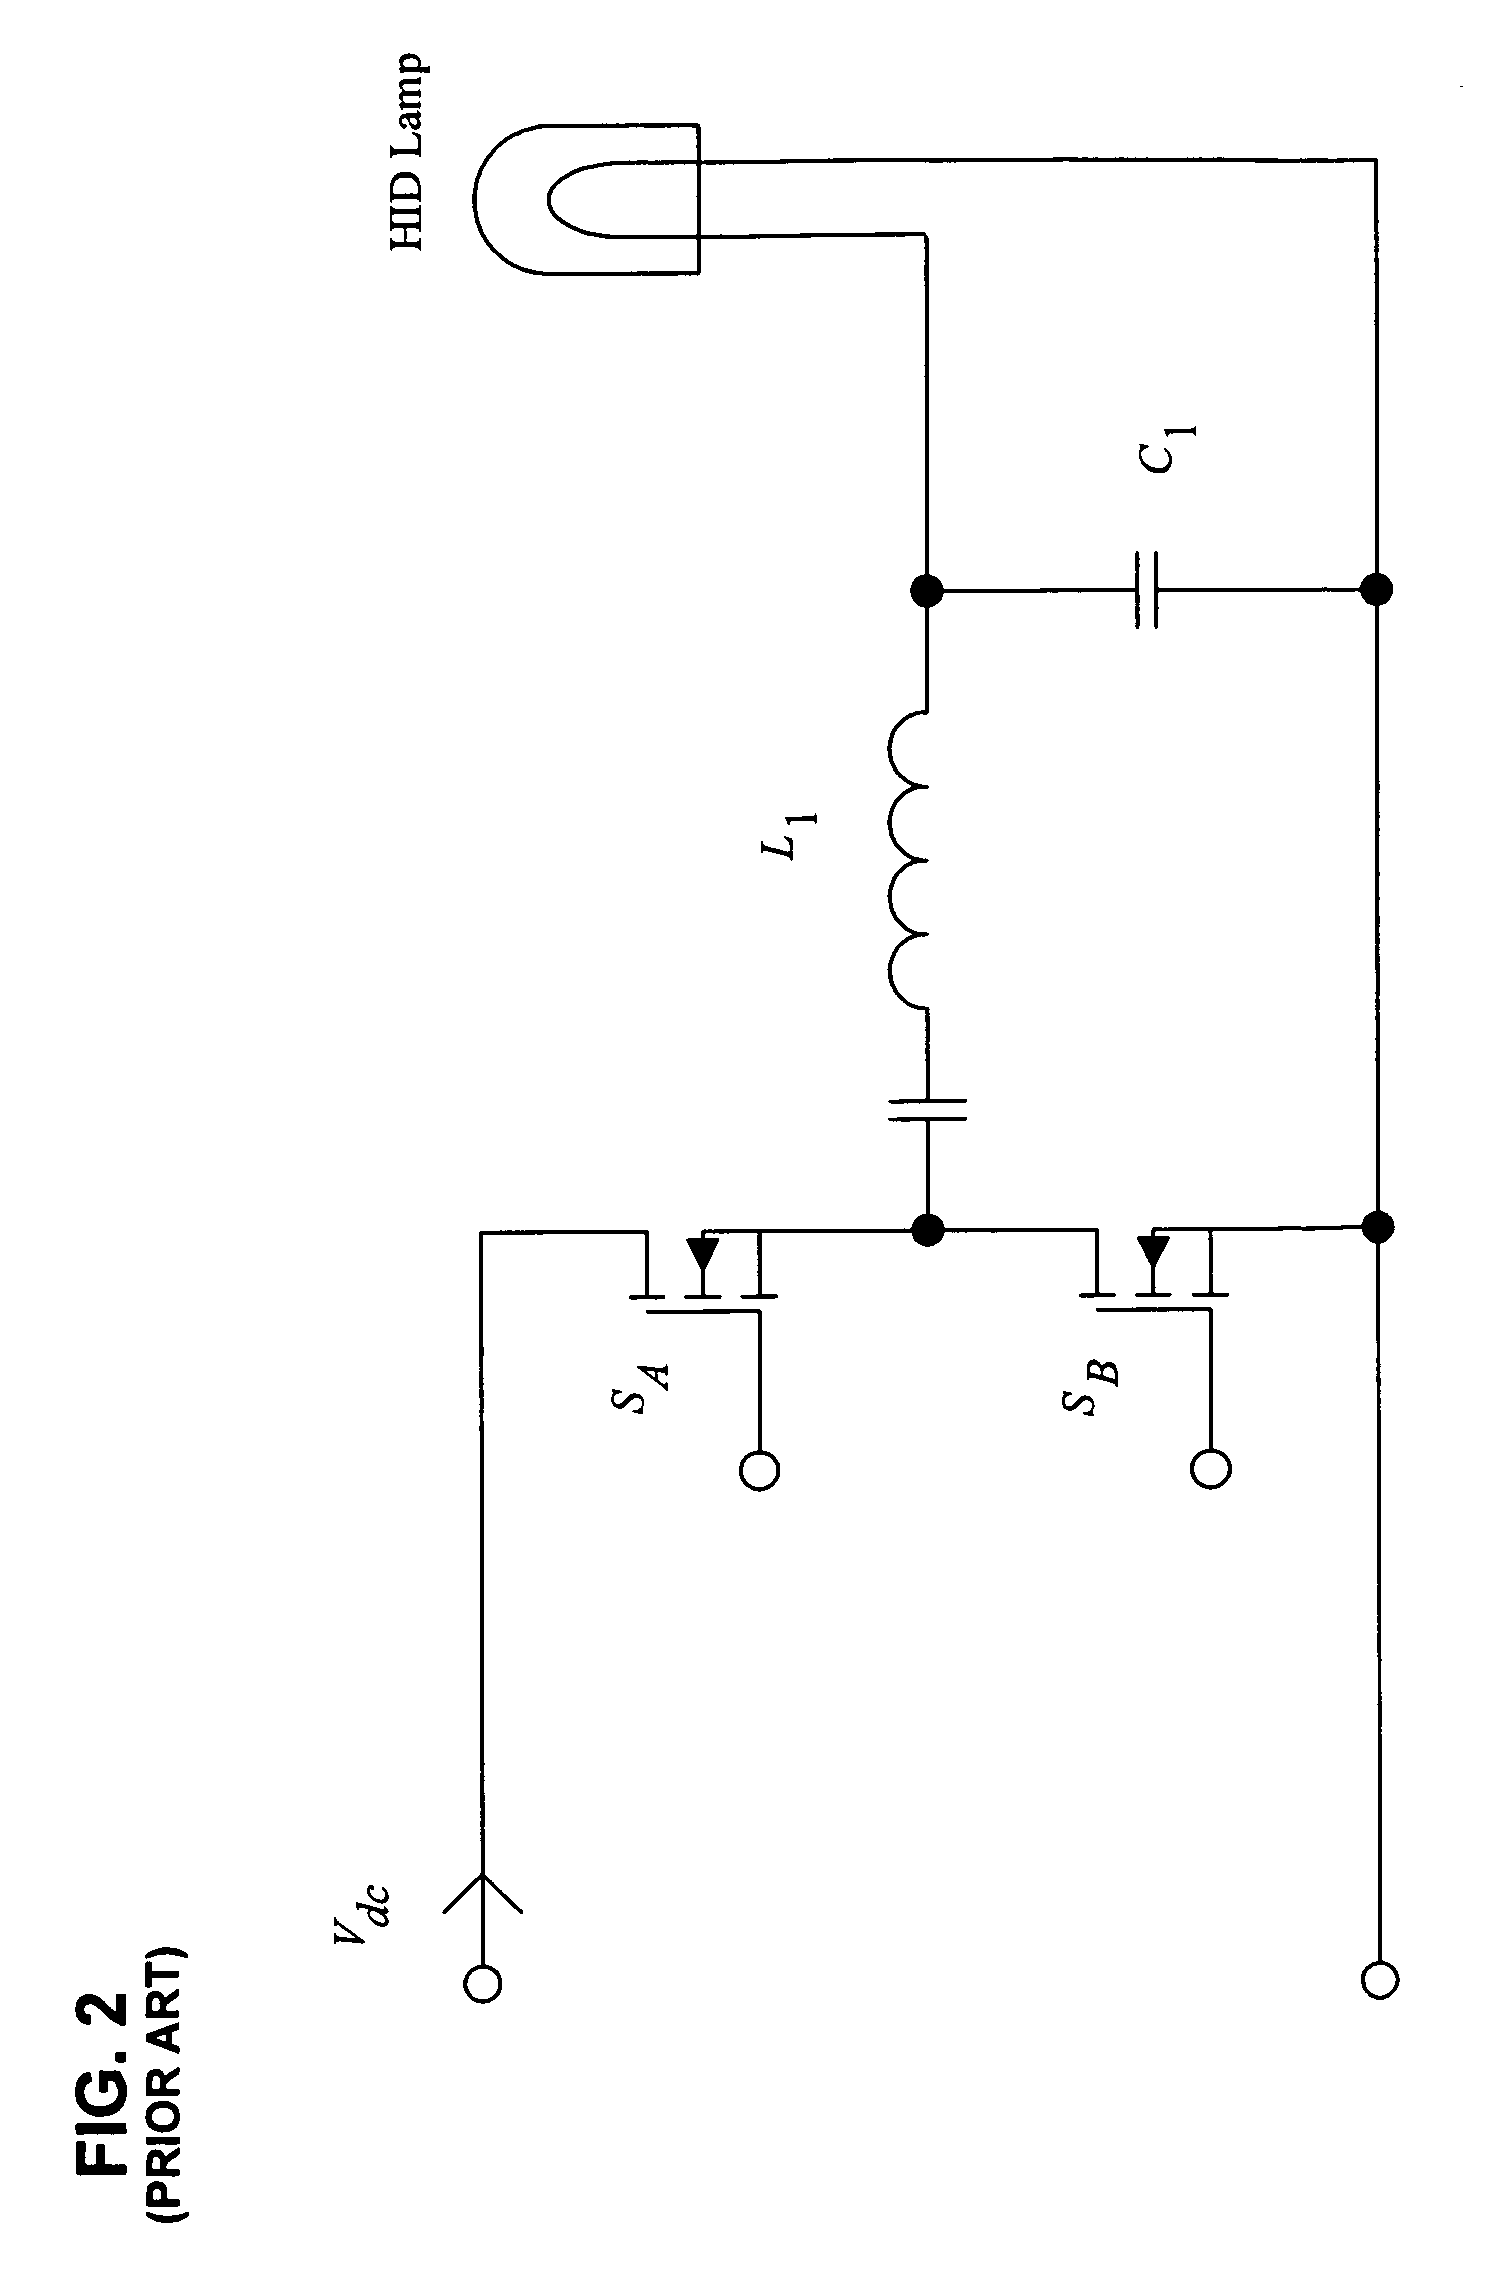 Novel circuit designs and control techniques for high frequency electronic ballasts for high intensity discharge lamps